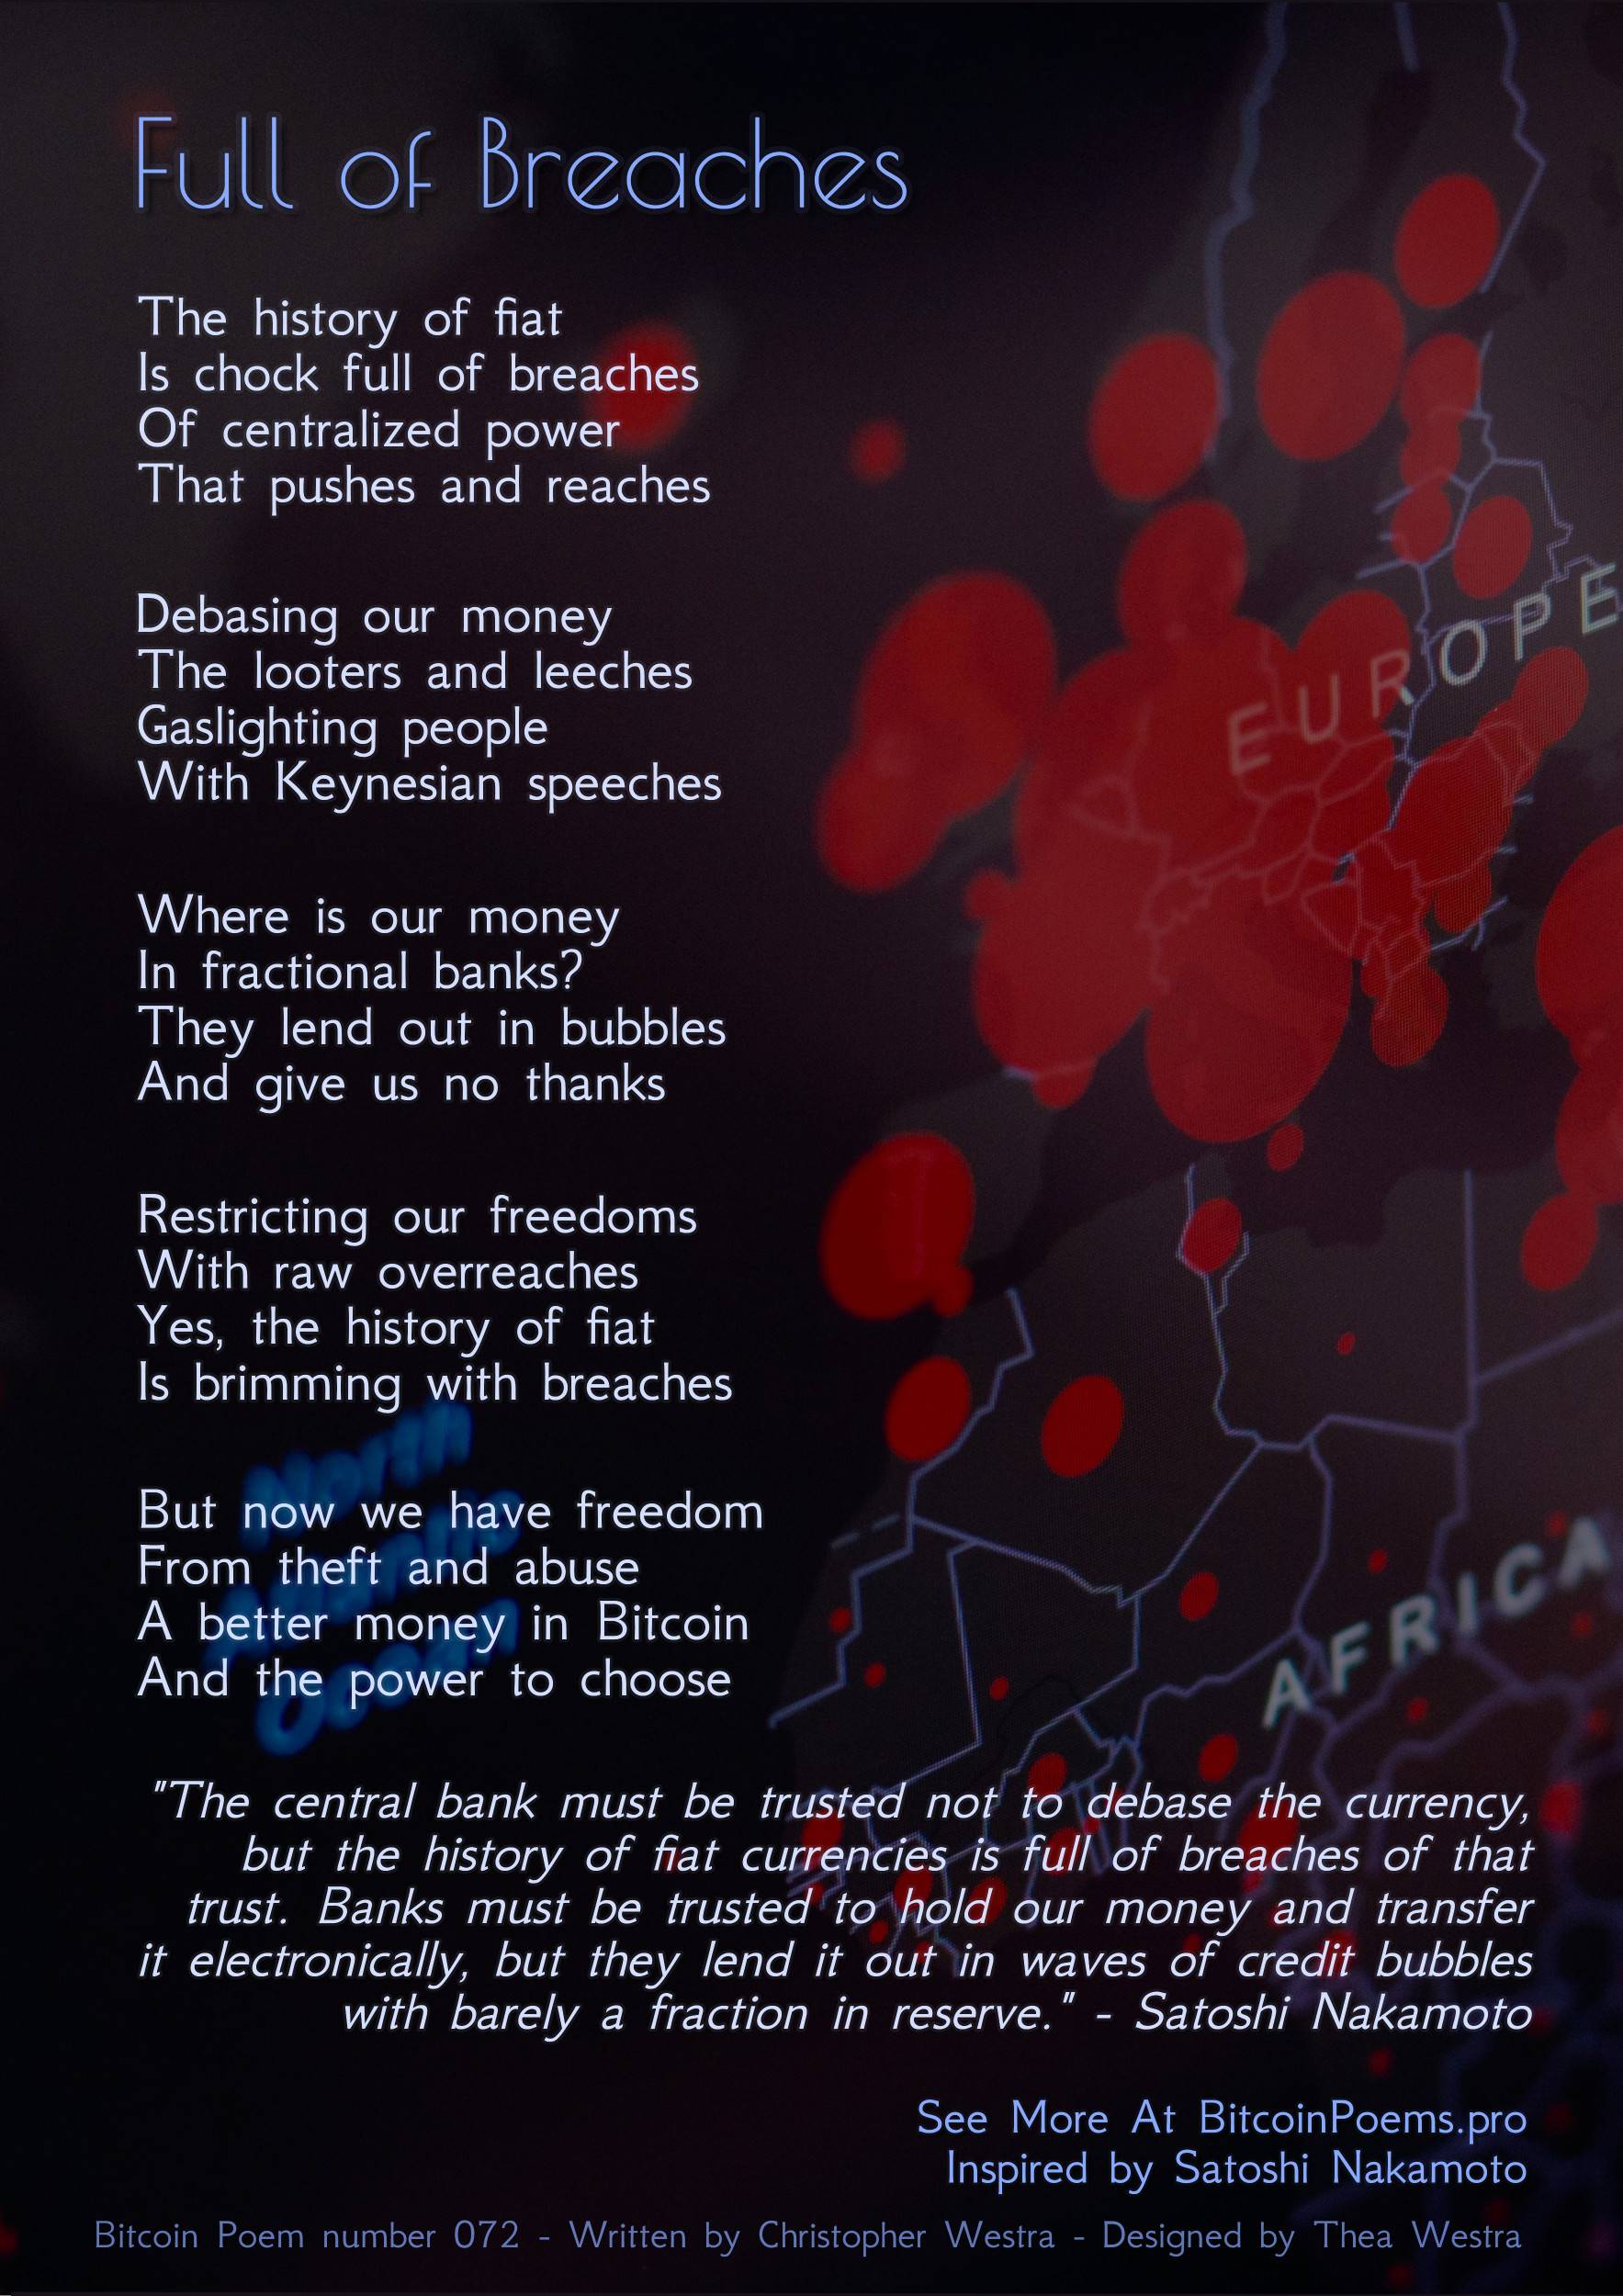 Full of Breaches - Bitcoin Poem 072 by Christopher Westra